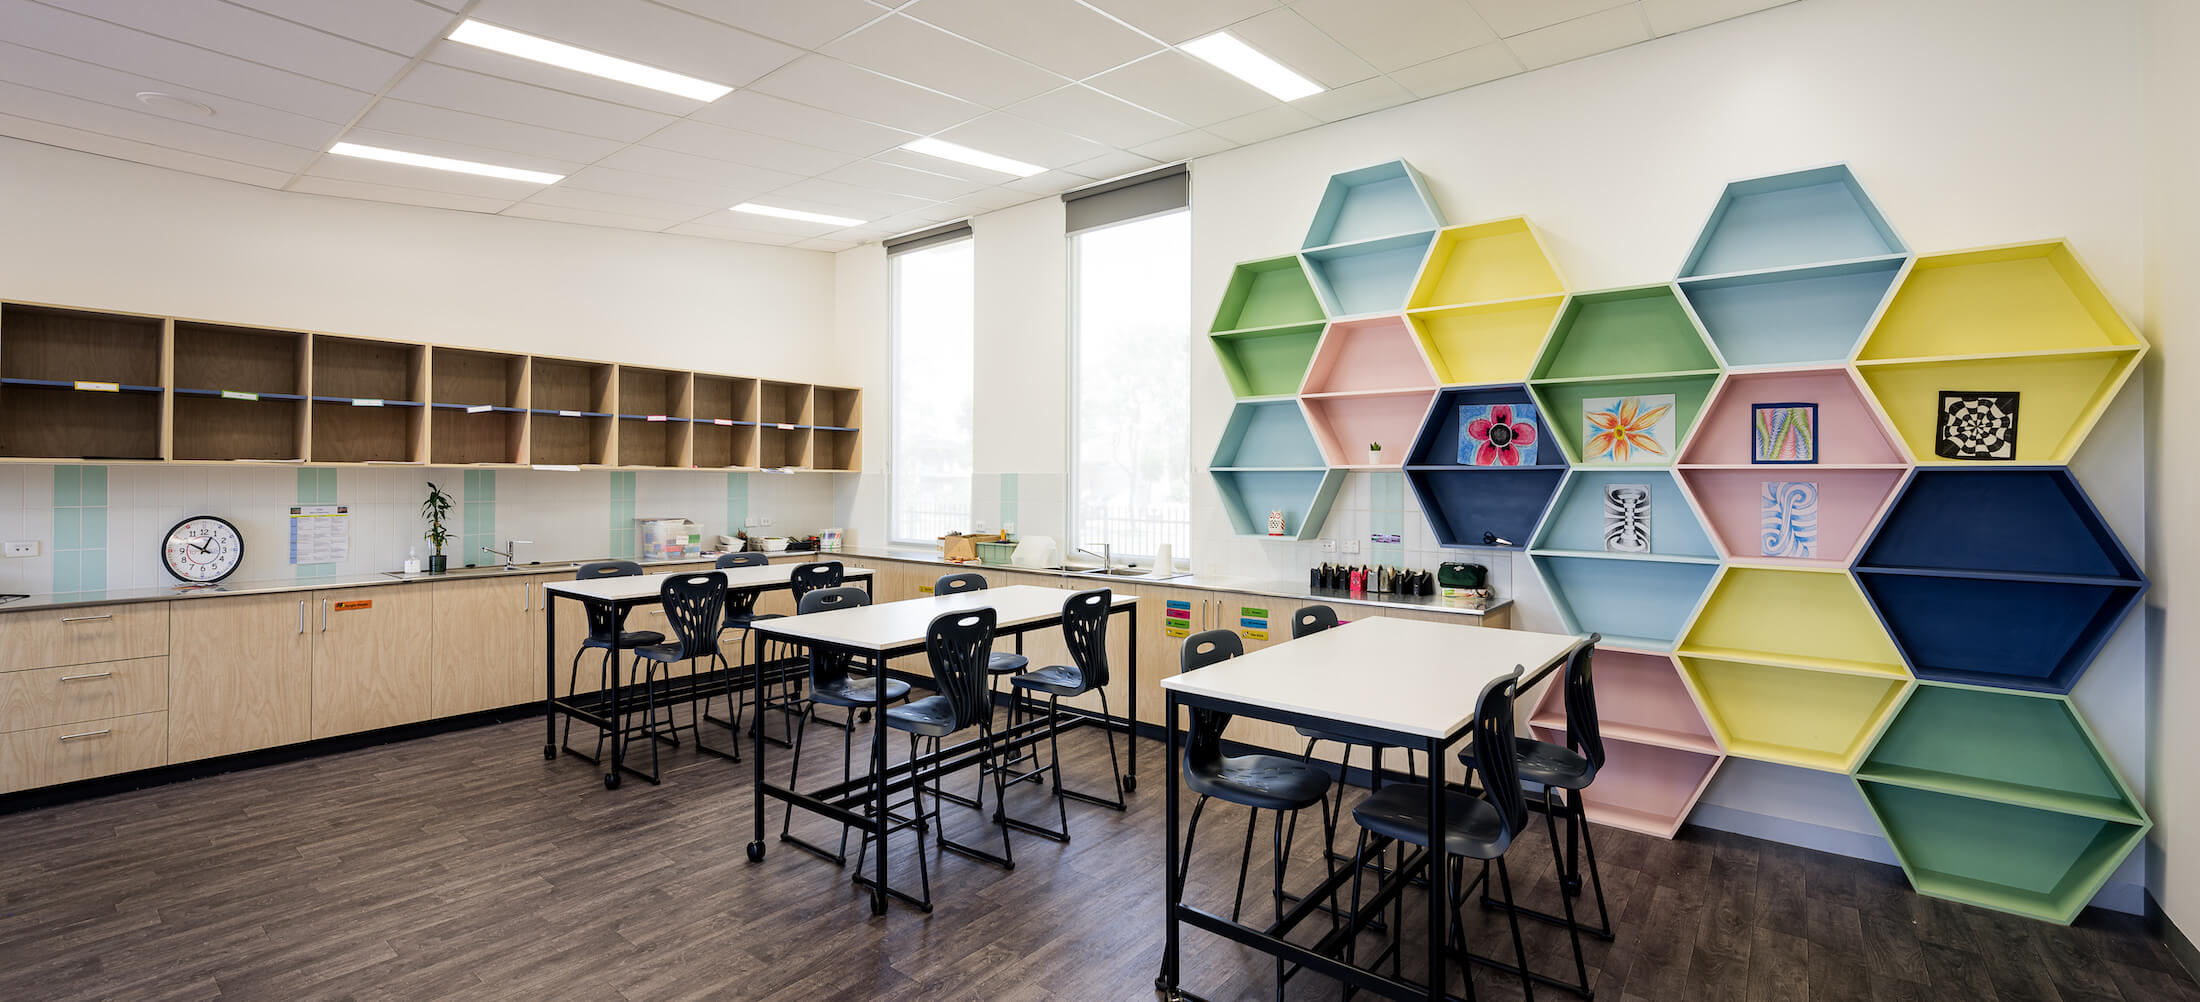 Art room with tables and hexagonal colourful nook wall feature, wet area sink